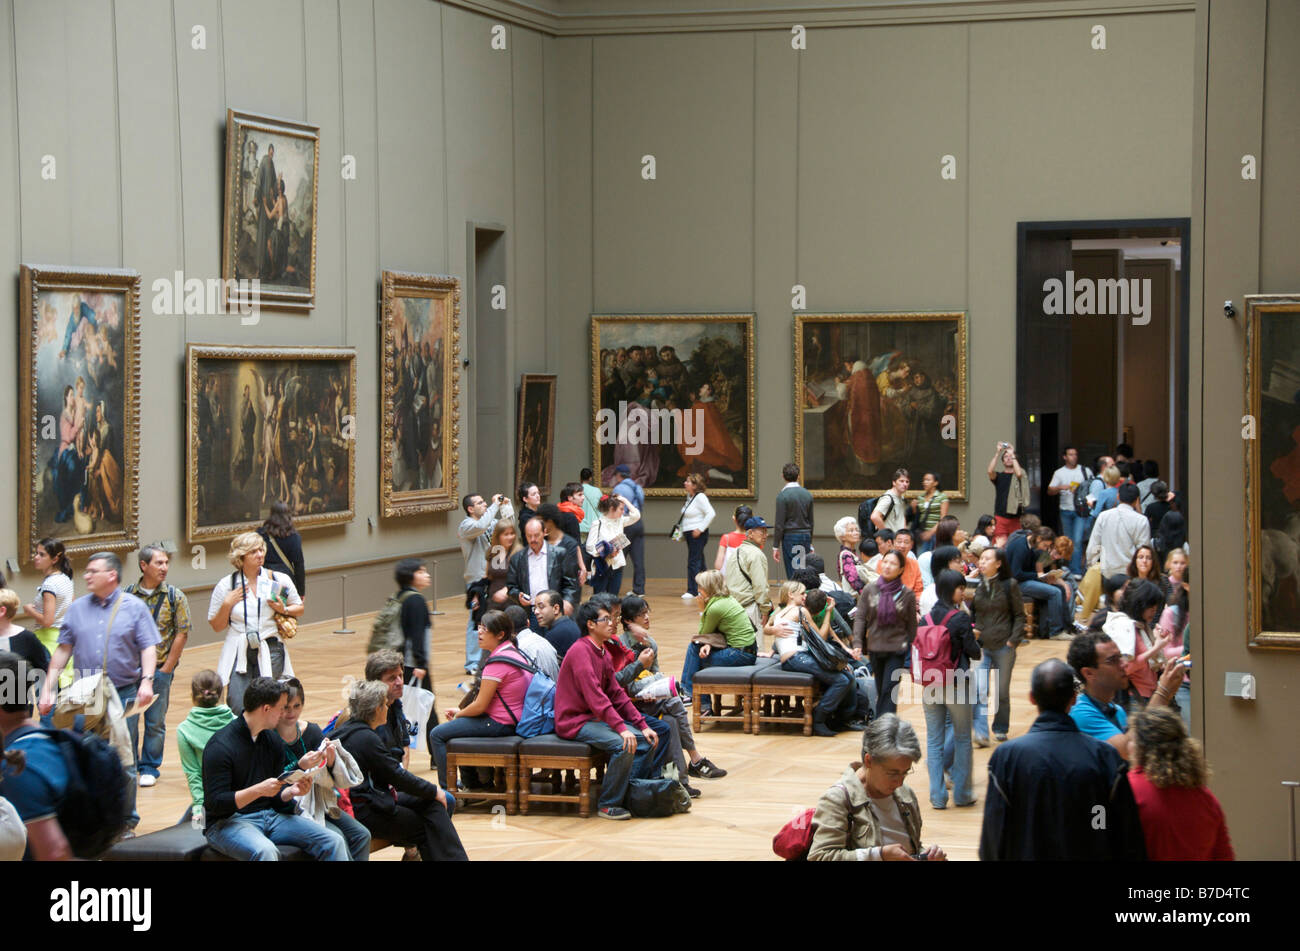 The Louvre, Paris - interior with people viewing the paintings Stock Photo